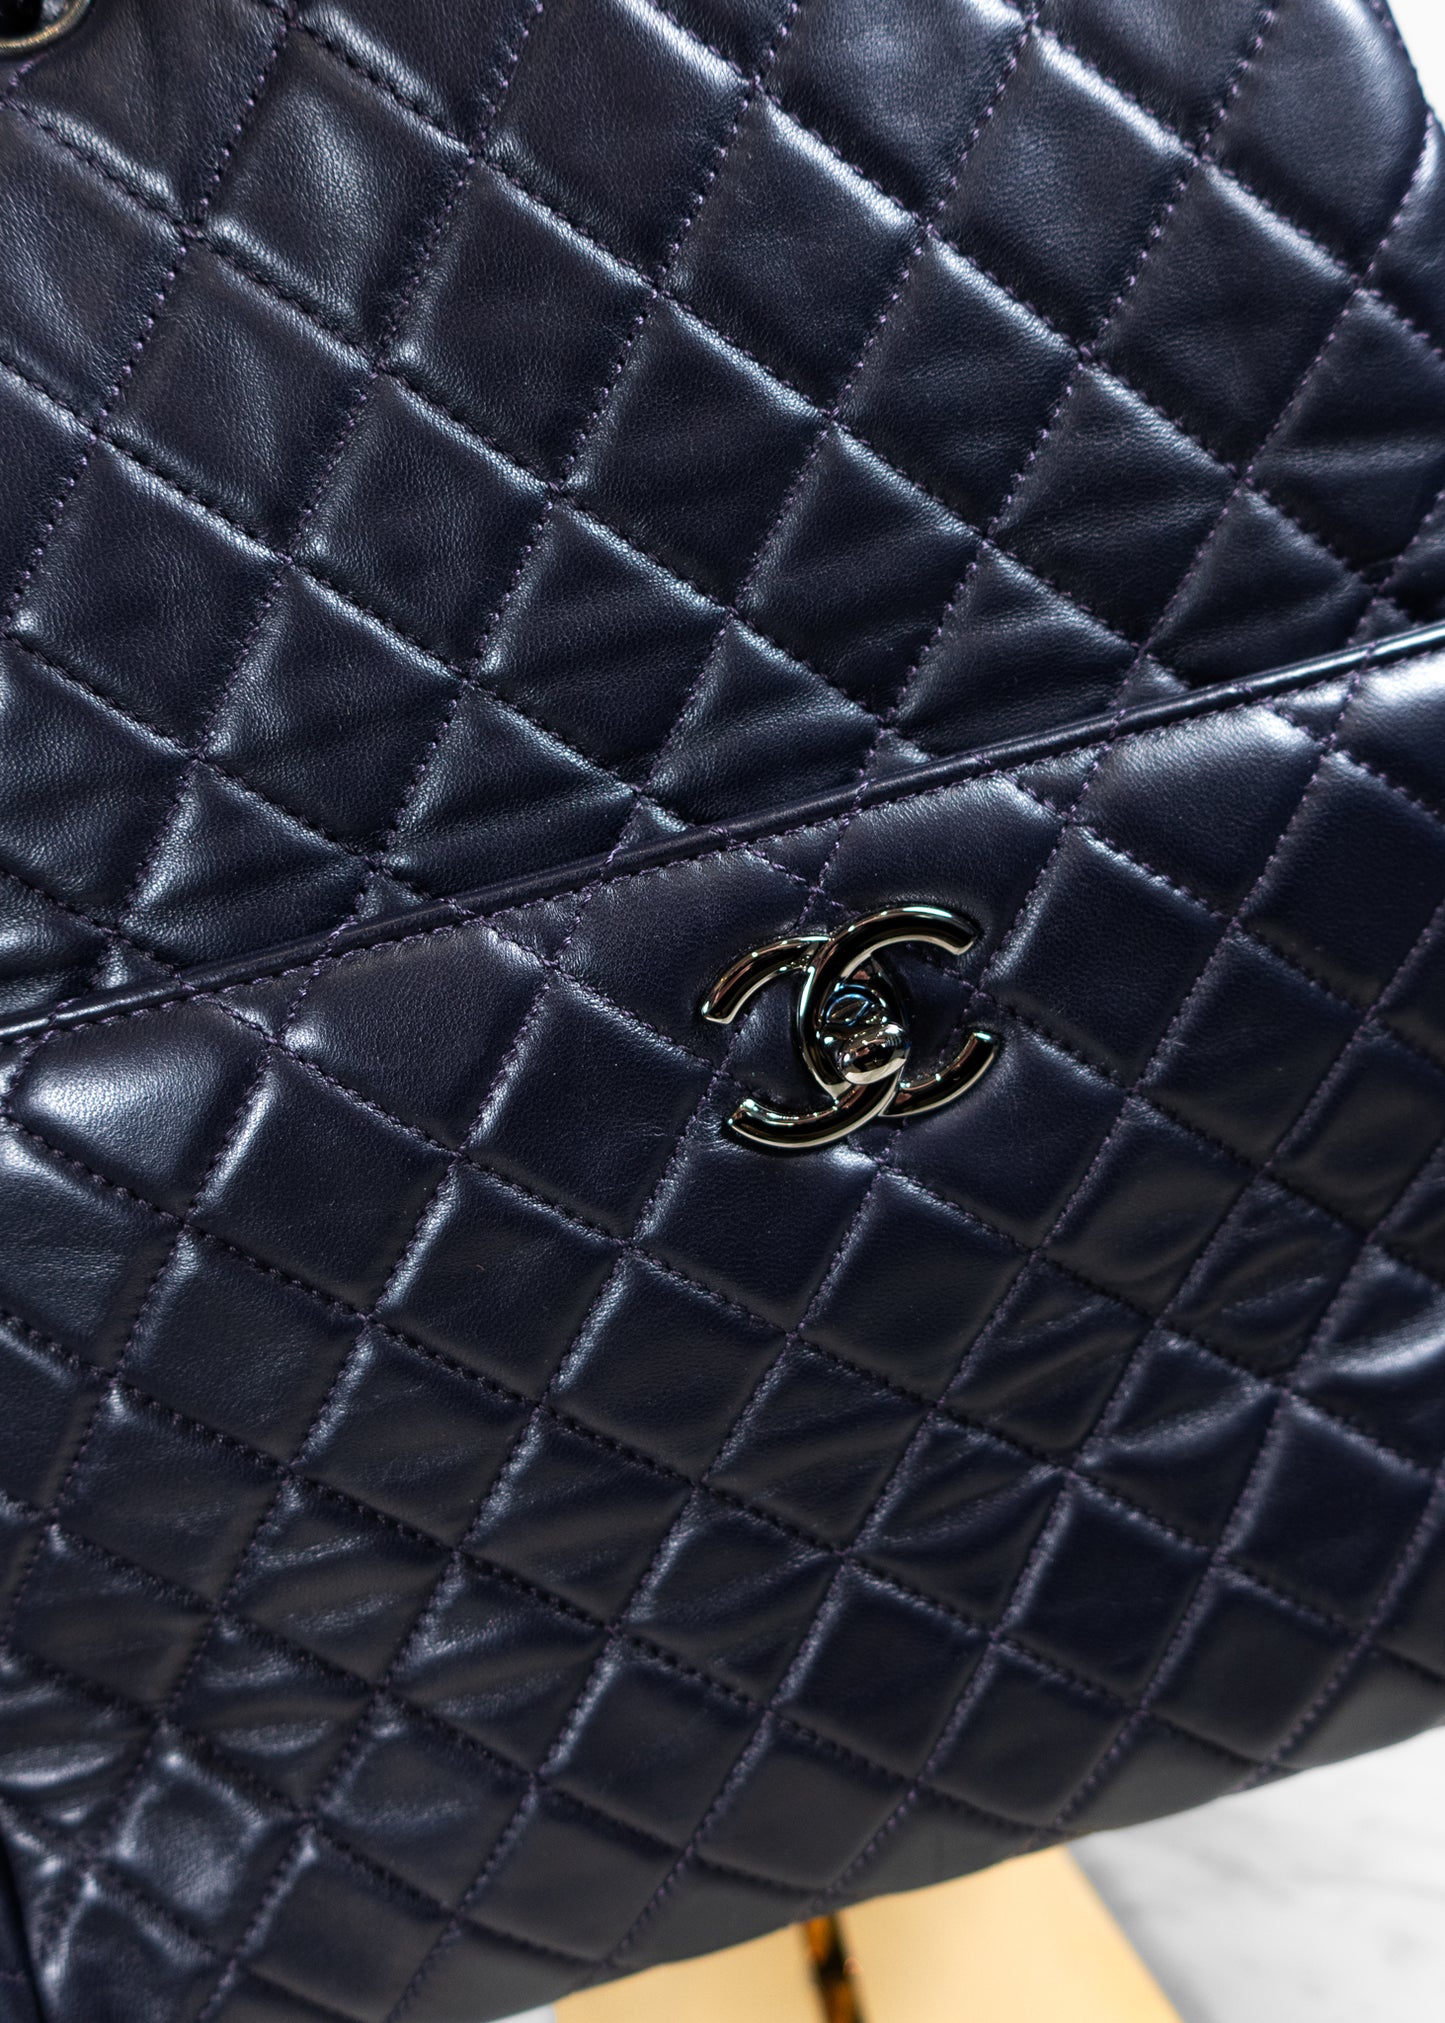 Chanel Deep Blue Lambskin Quilted Large Drawstring Bag